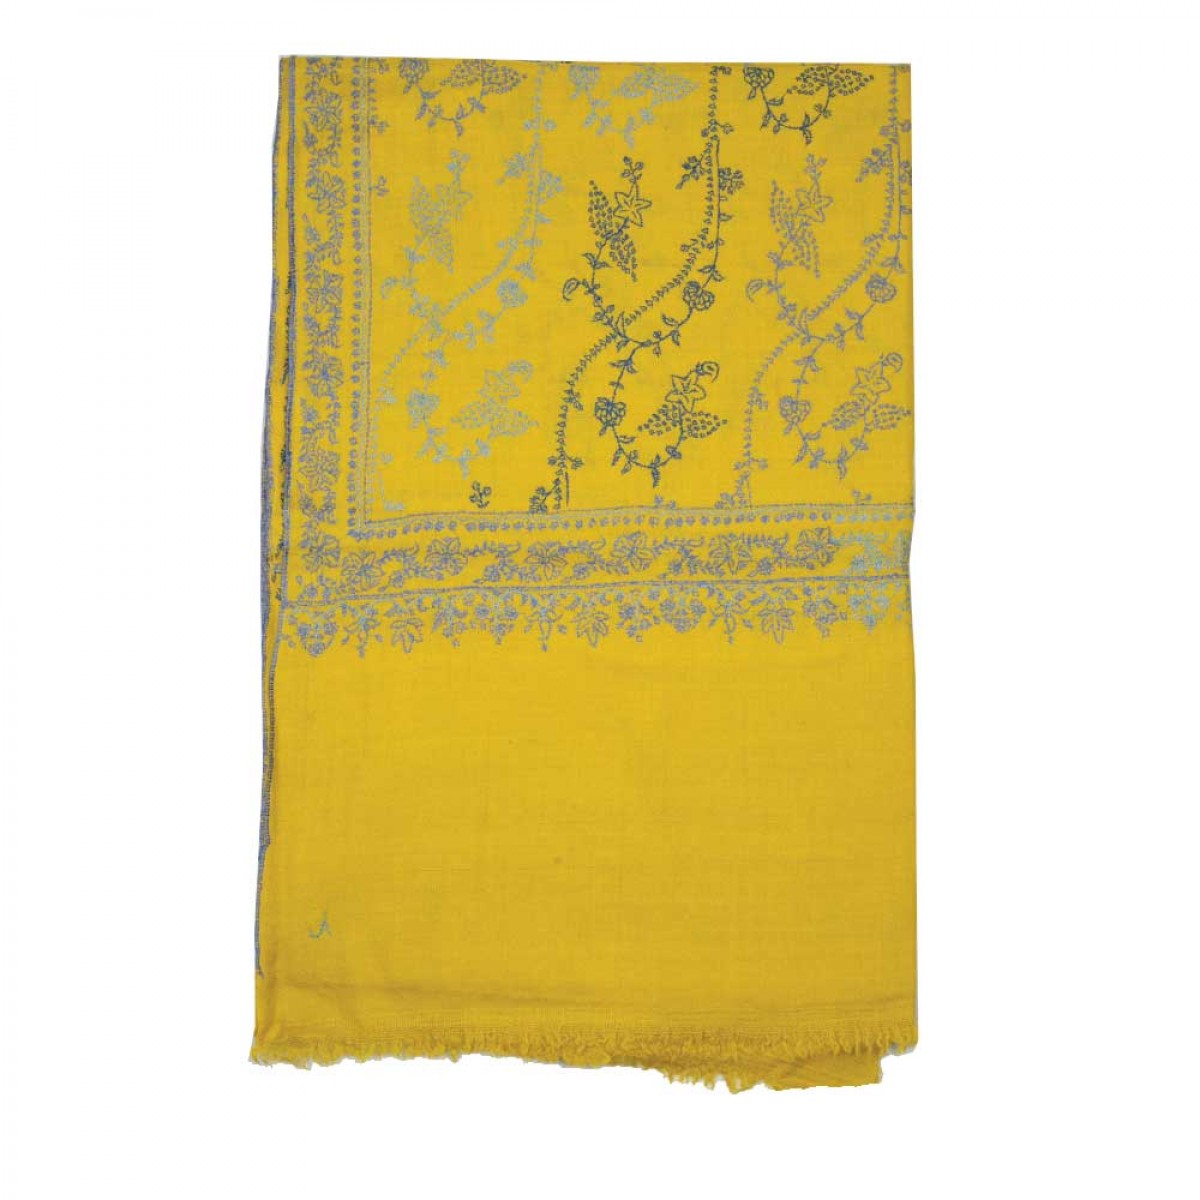 Embroidered Pashmina Shawls - Pineapple Color